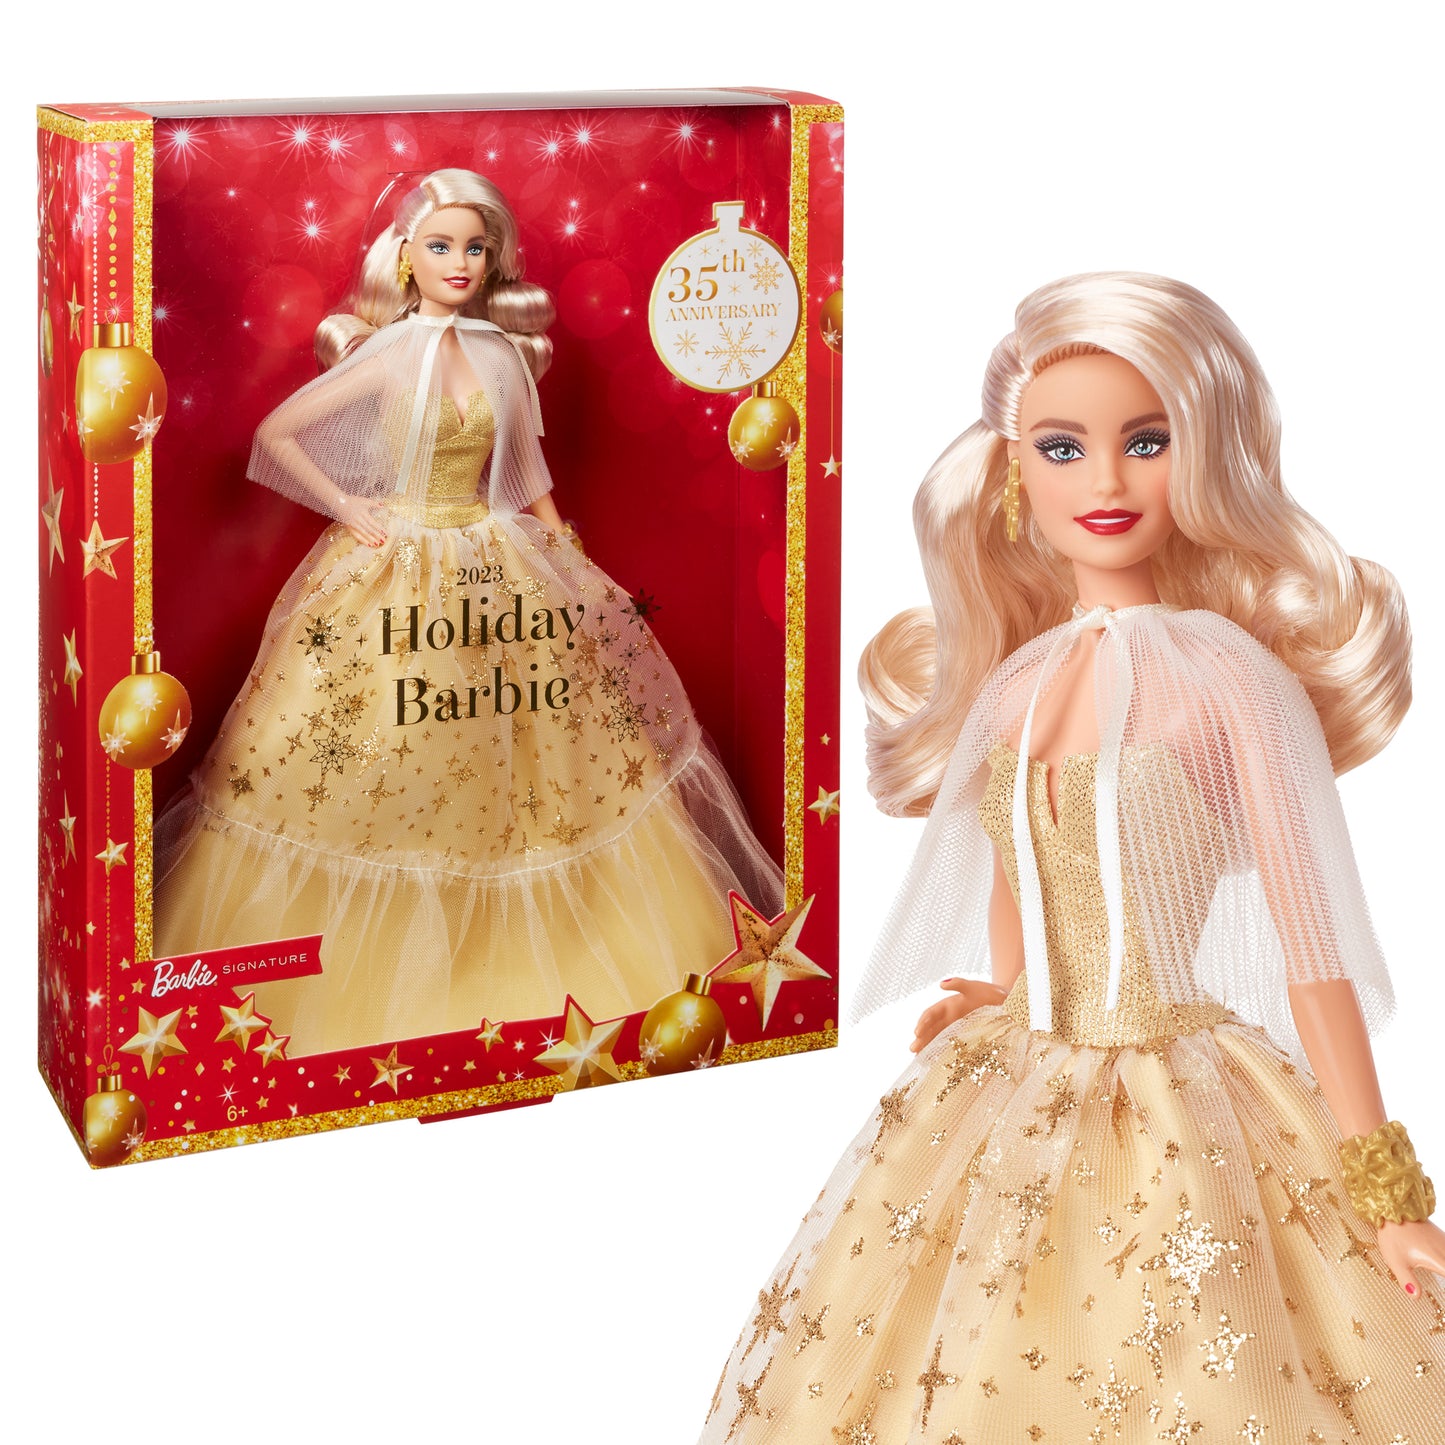 2023 Holiday BARBIE Doll, Blond Hair